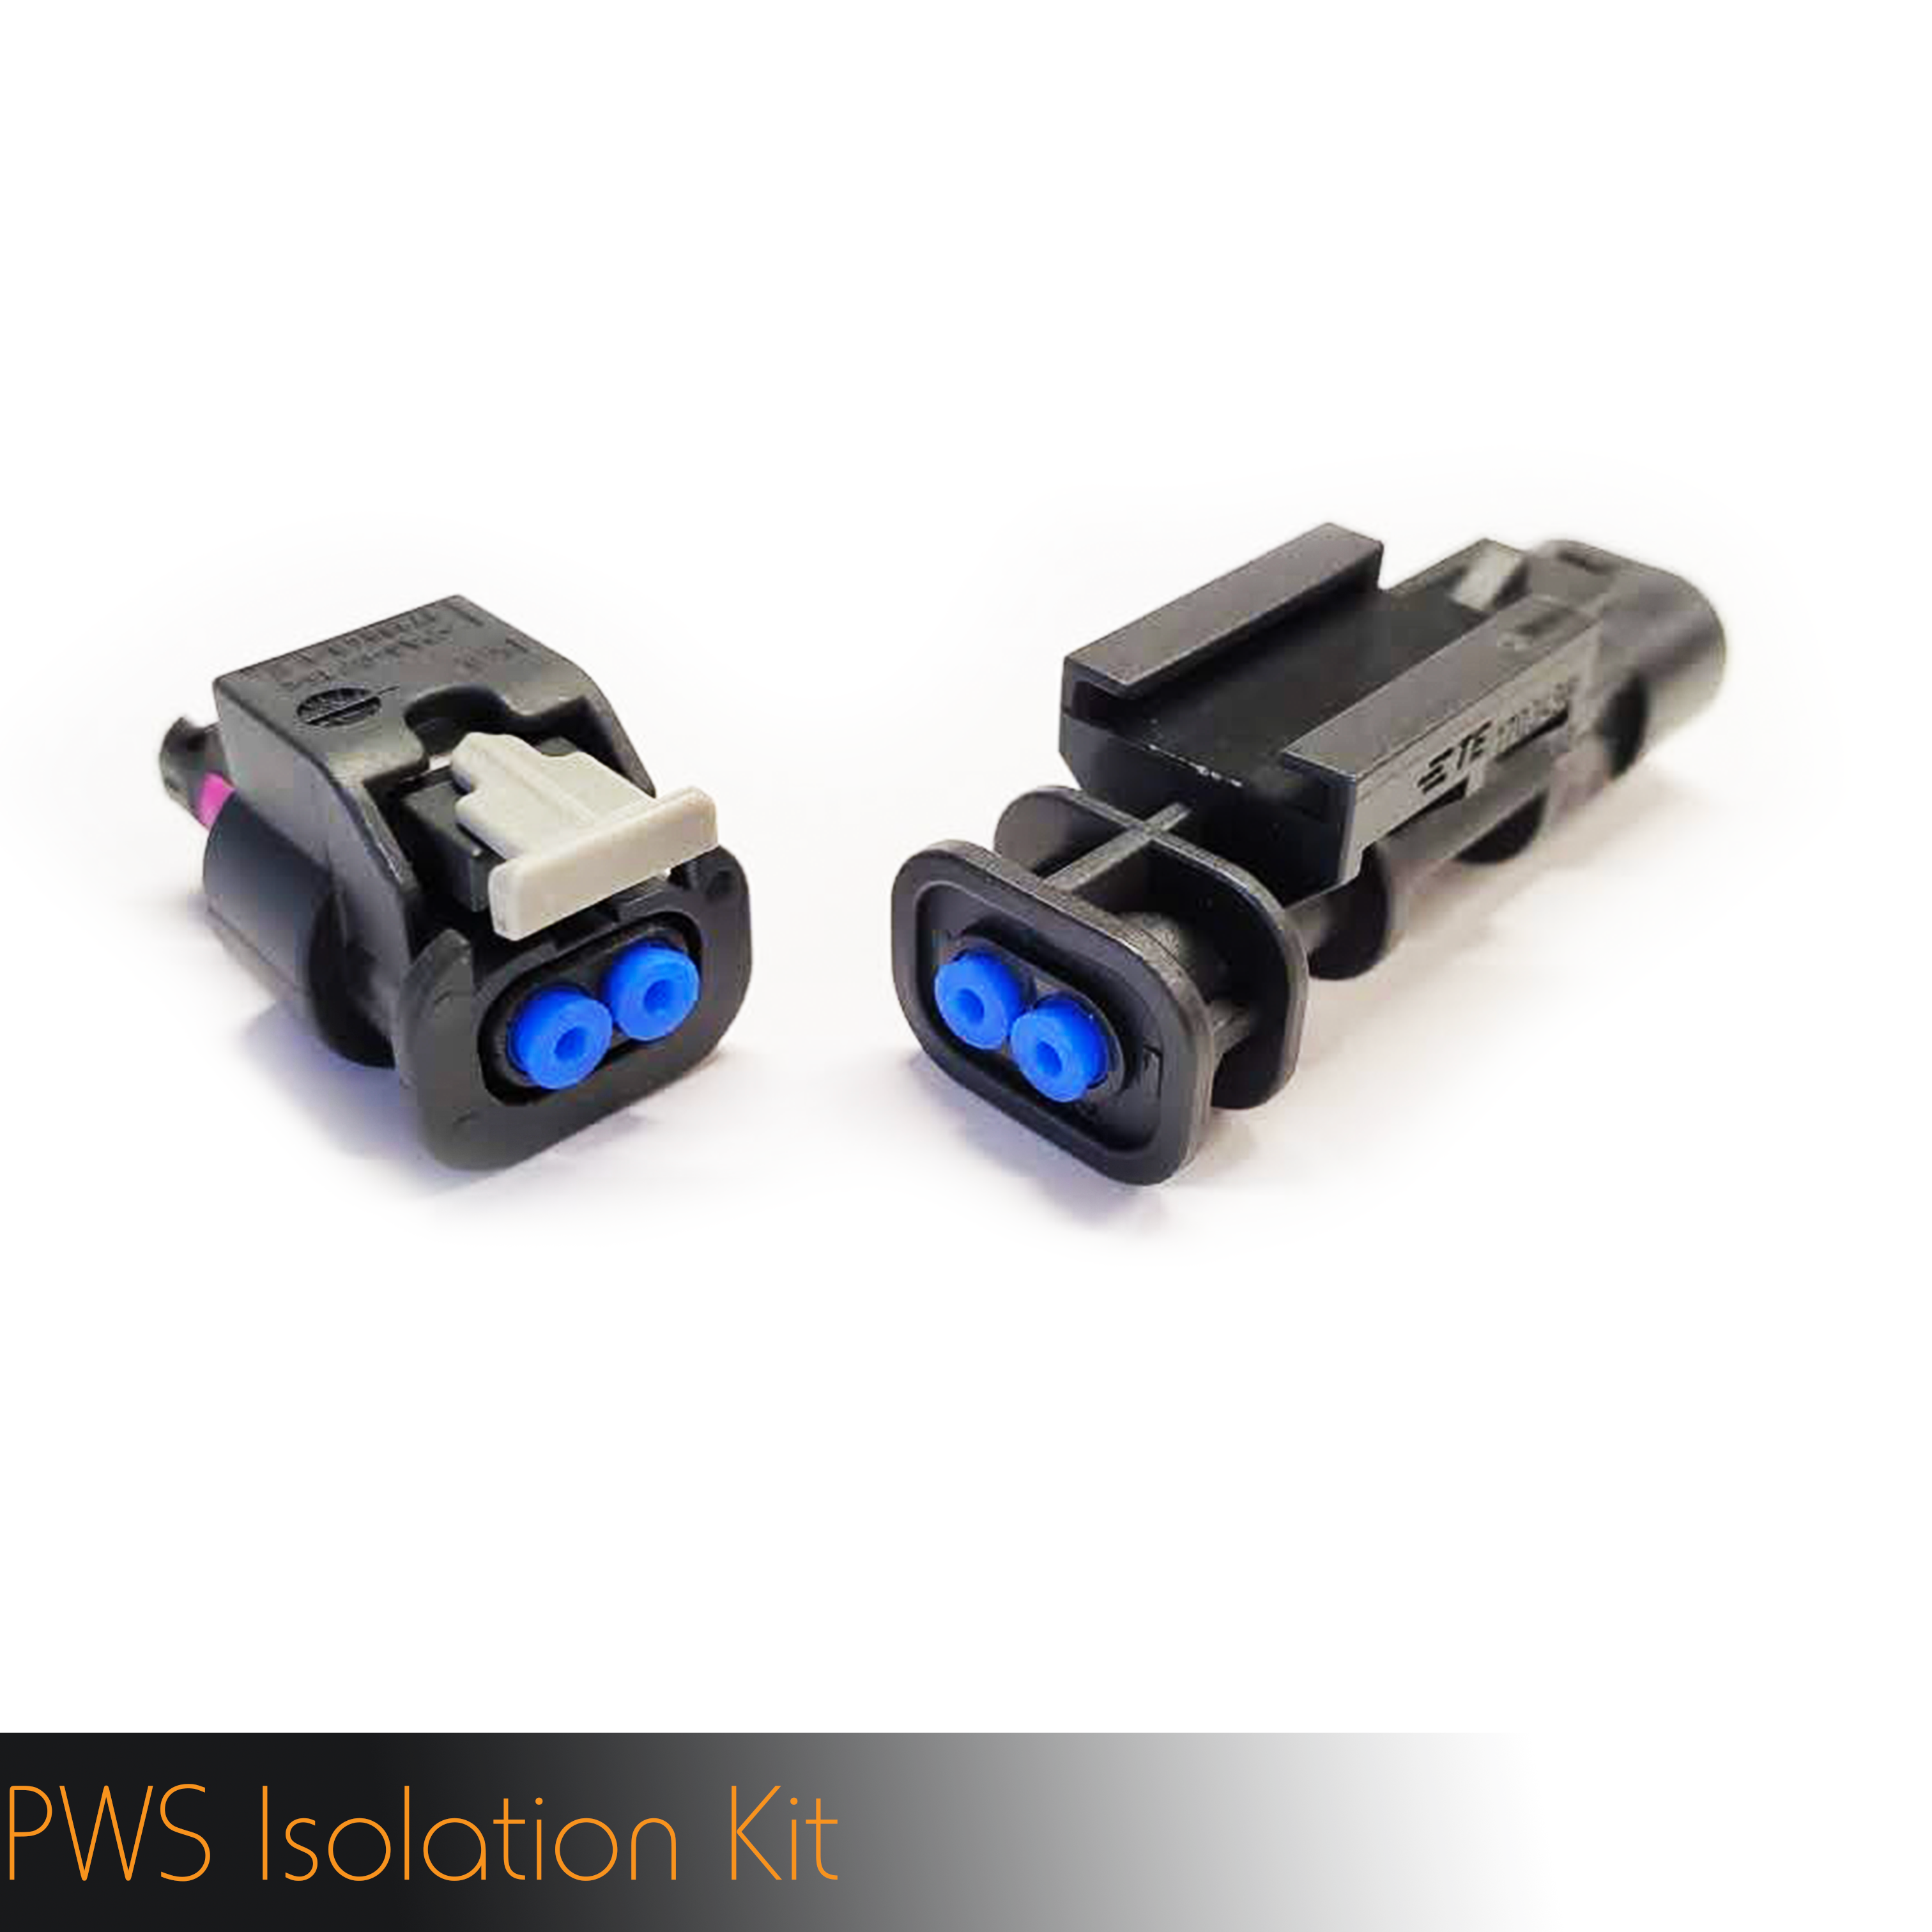 Isolation Kit for the PWS (Pedestrian Warning System)